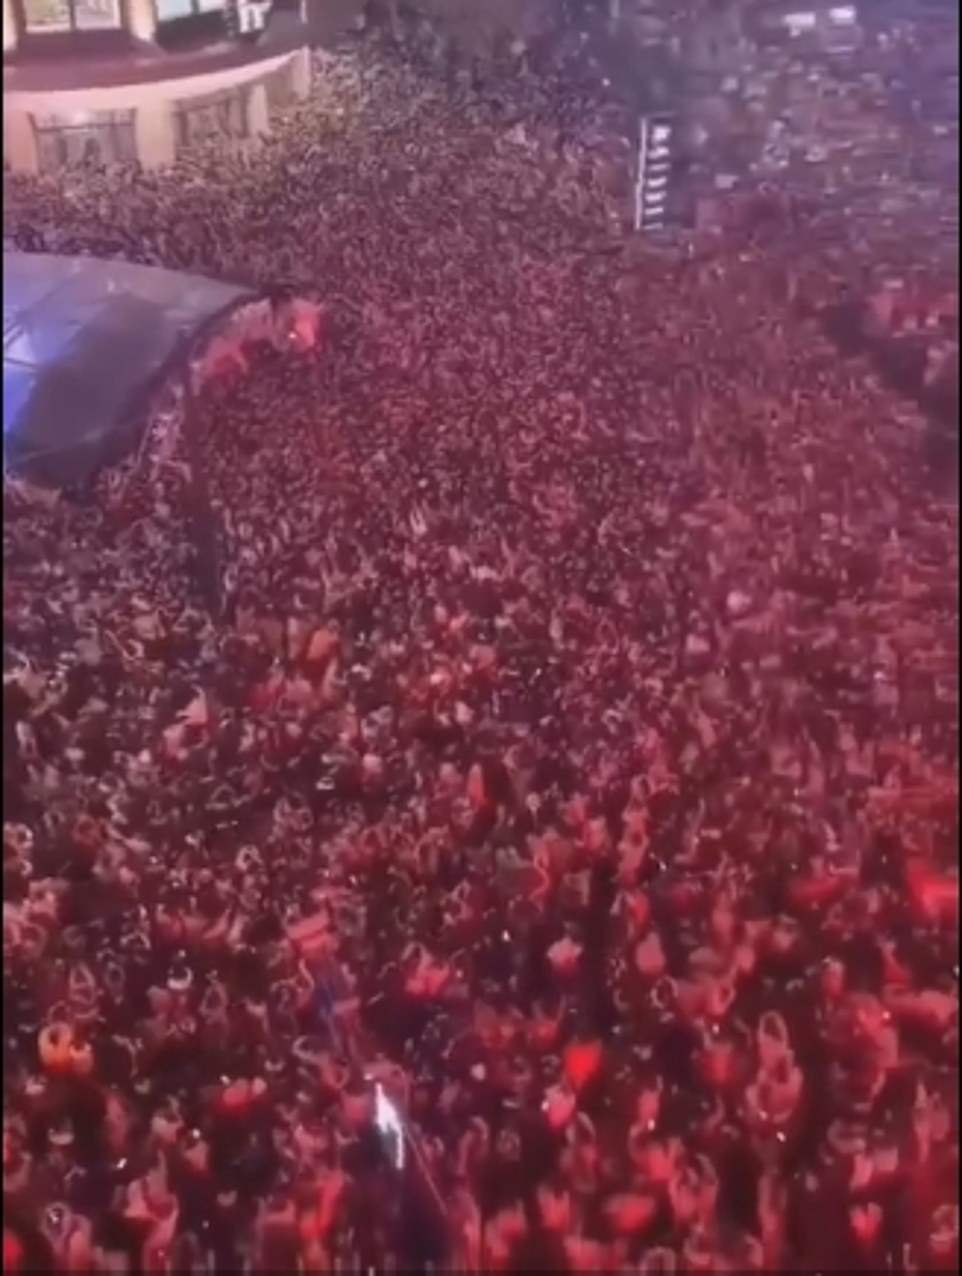 WUHAN: Incredible images of the huge crowds of people gathered on the streets of Wuhan were shared to social media